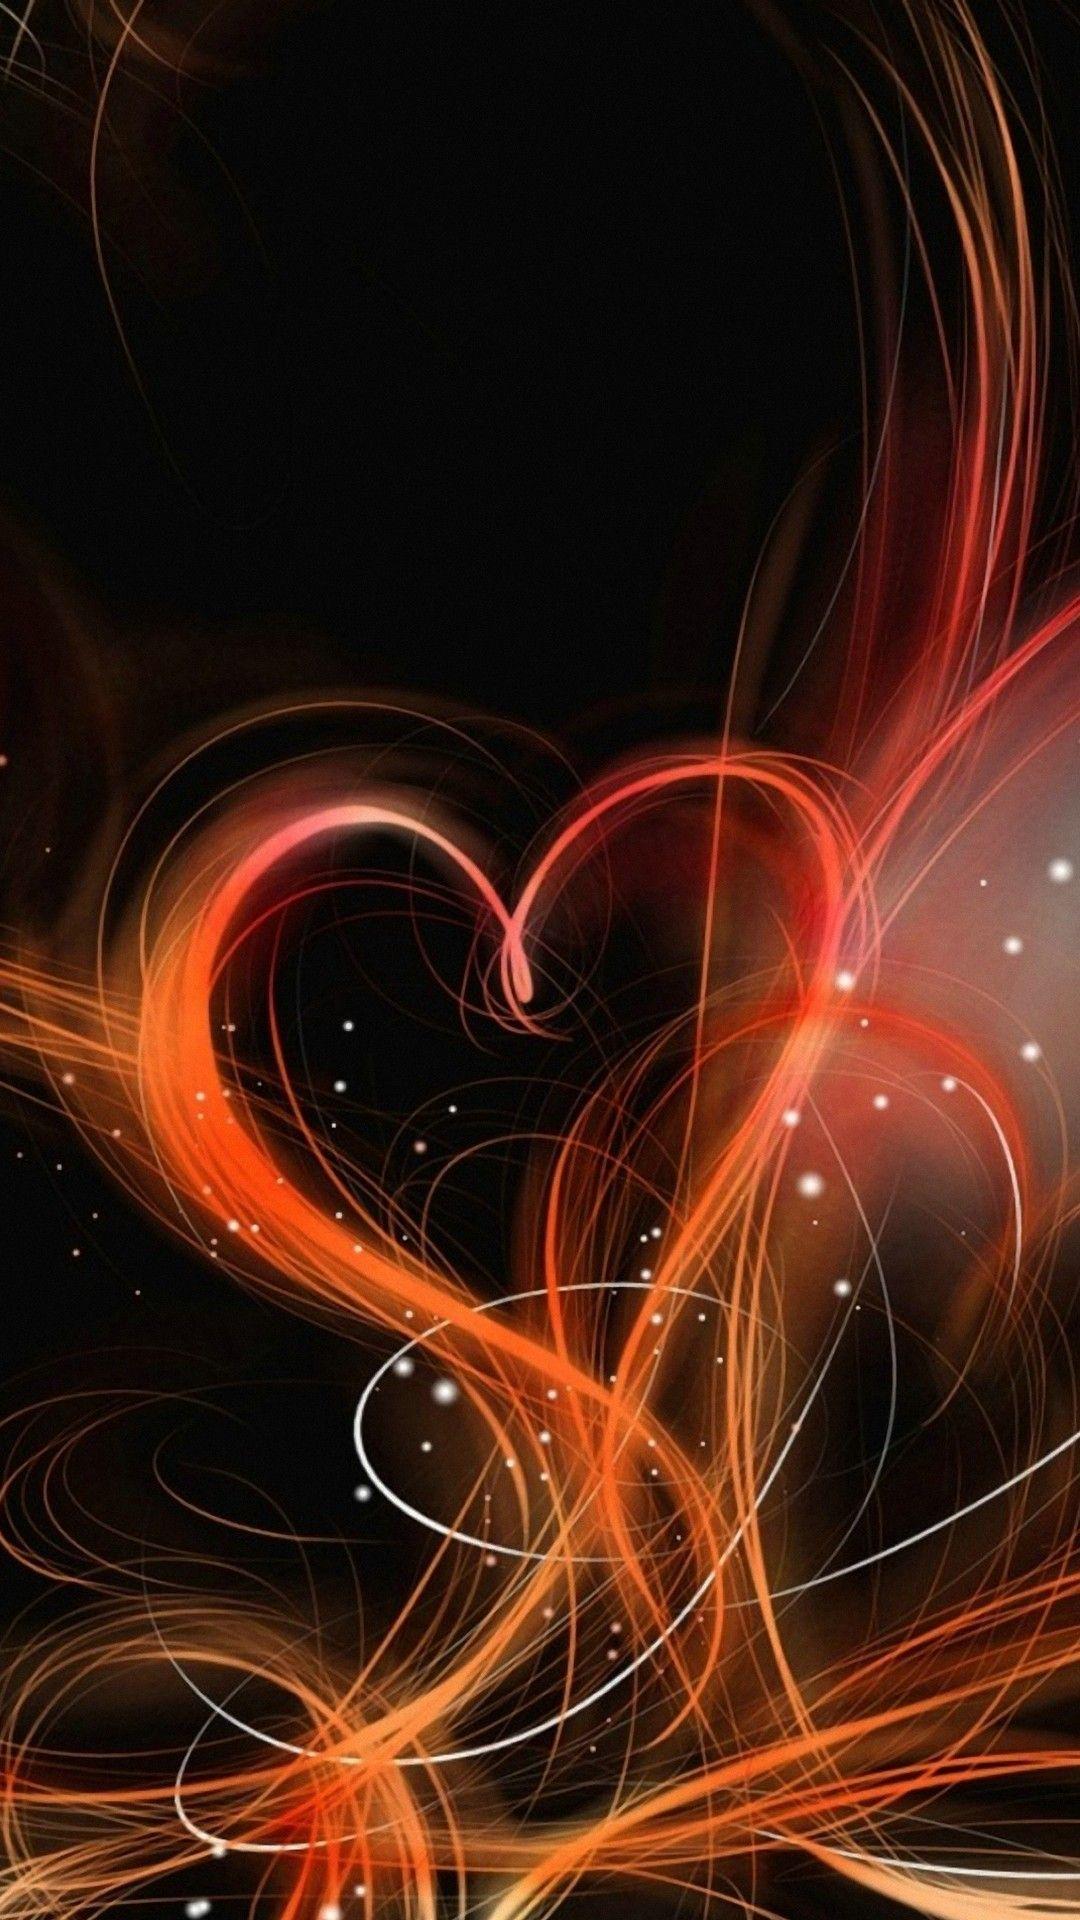 Mobile Love Wallpapers - Top Free Mobile Love Backgrounds - WallpaperAccess